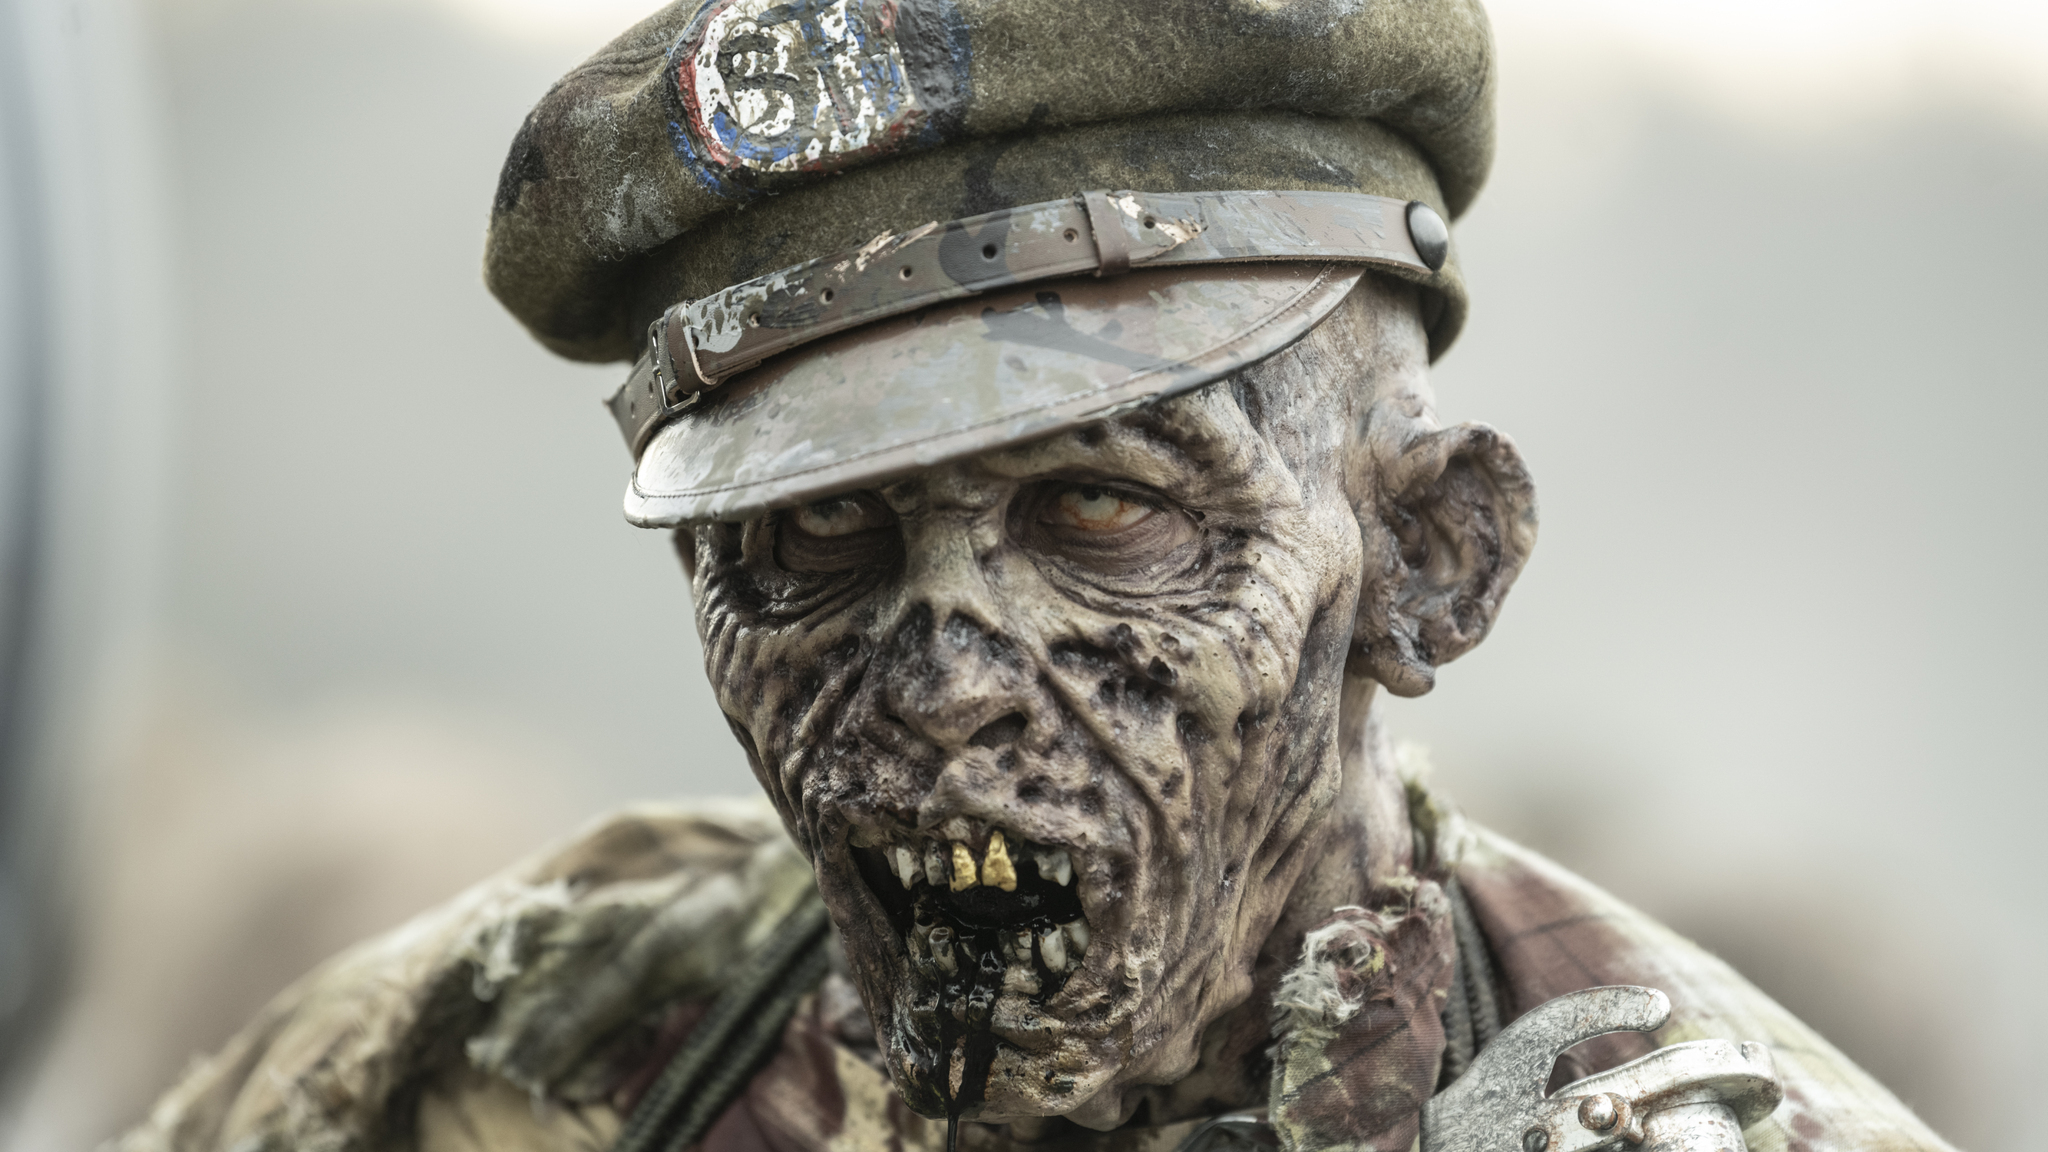 Movie image of a zombie with rotting face. It is wearing a military cap.